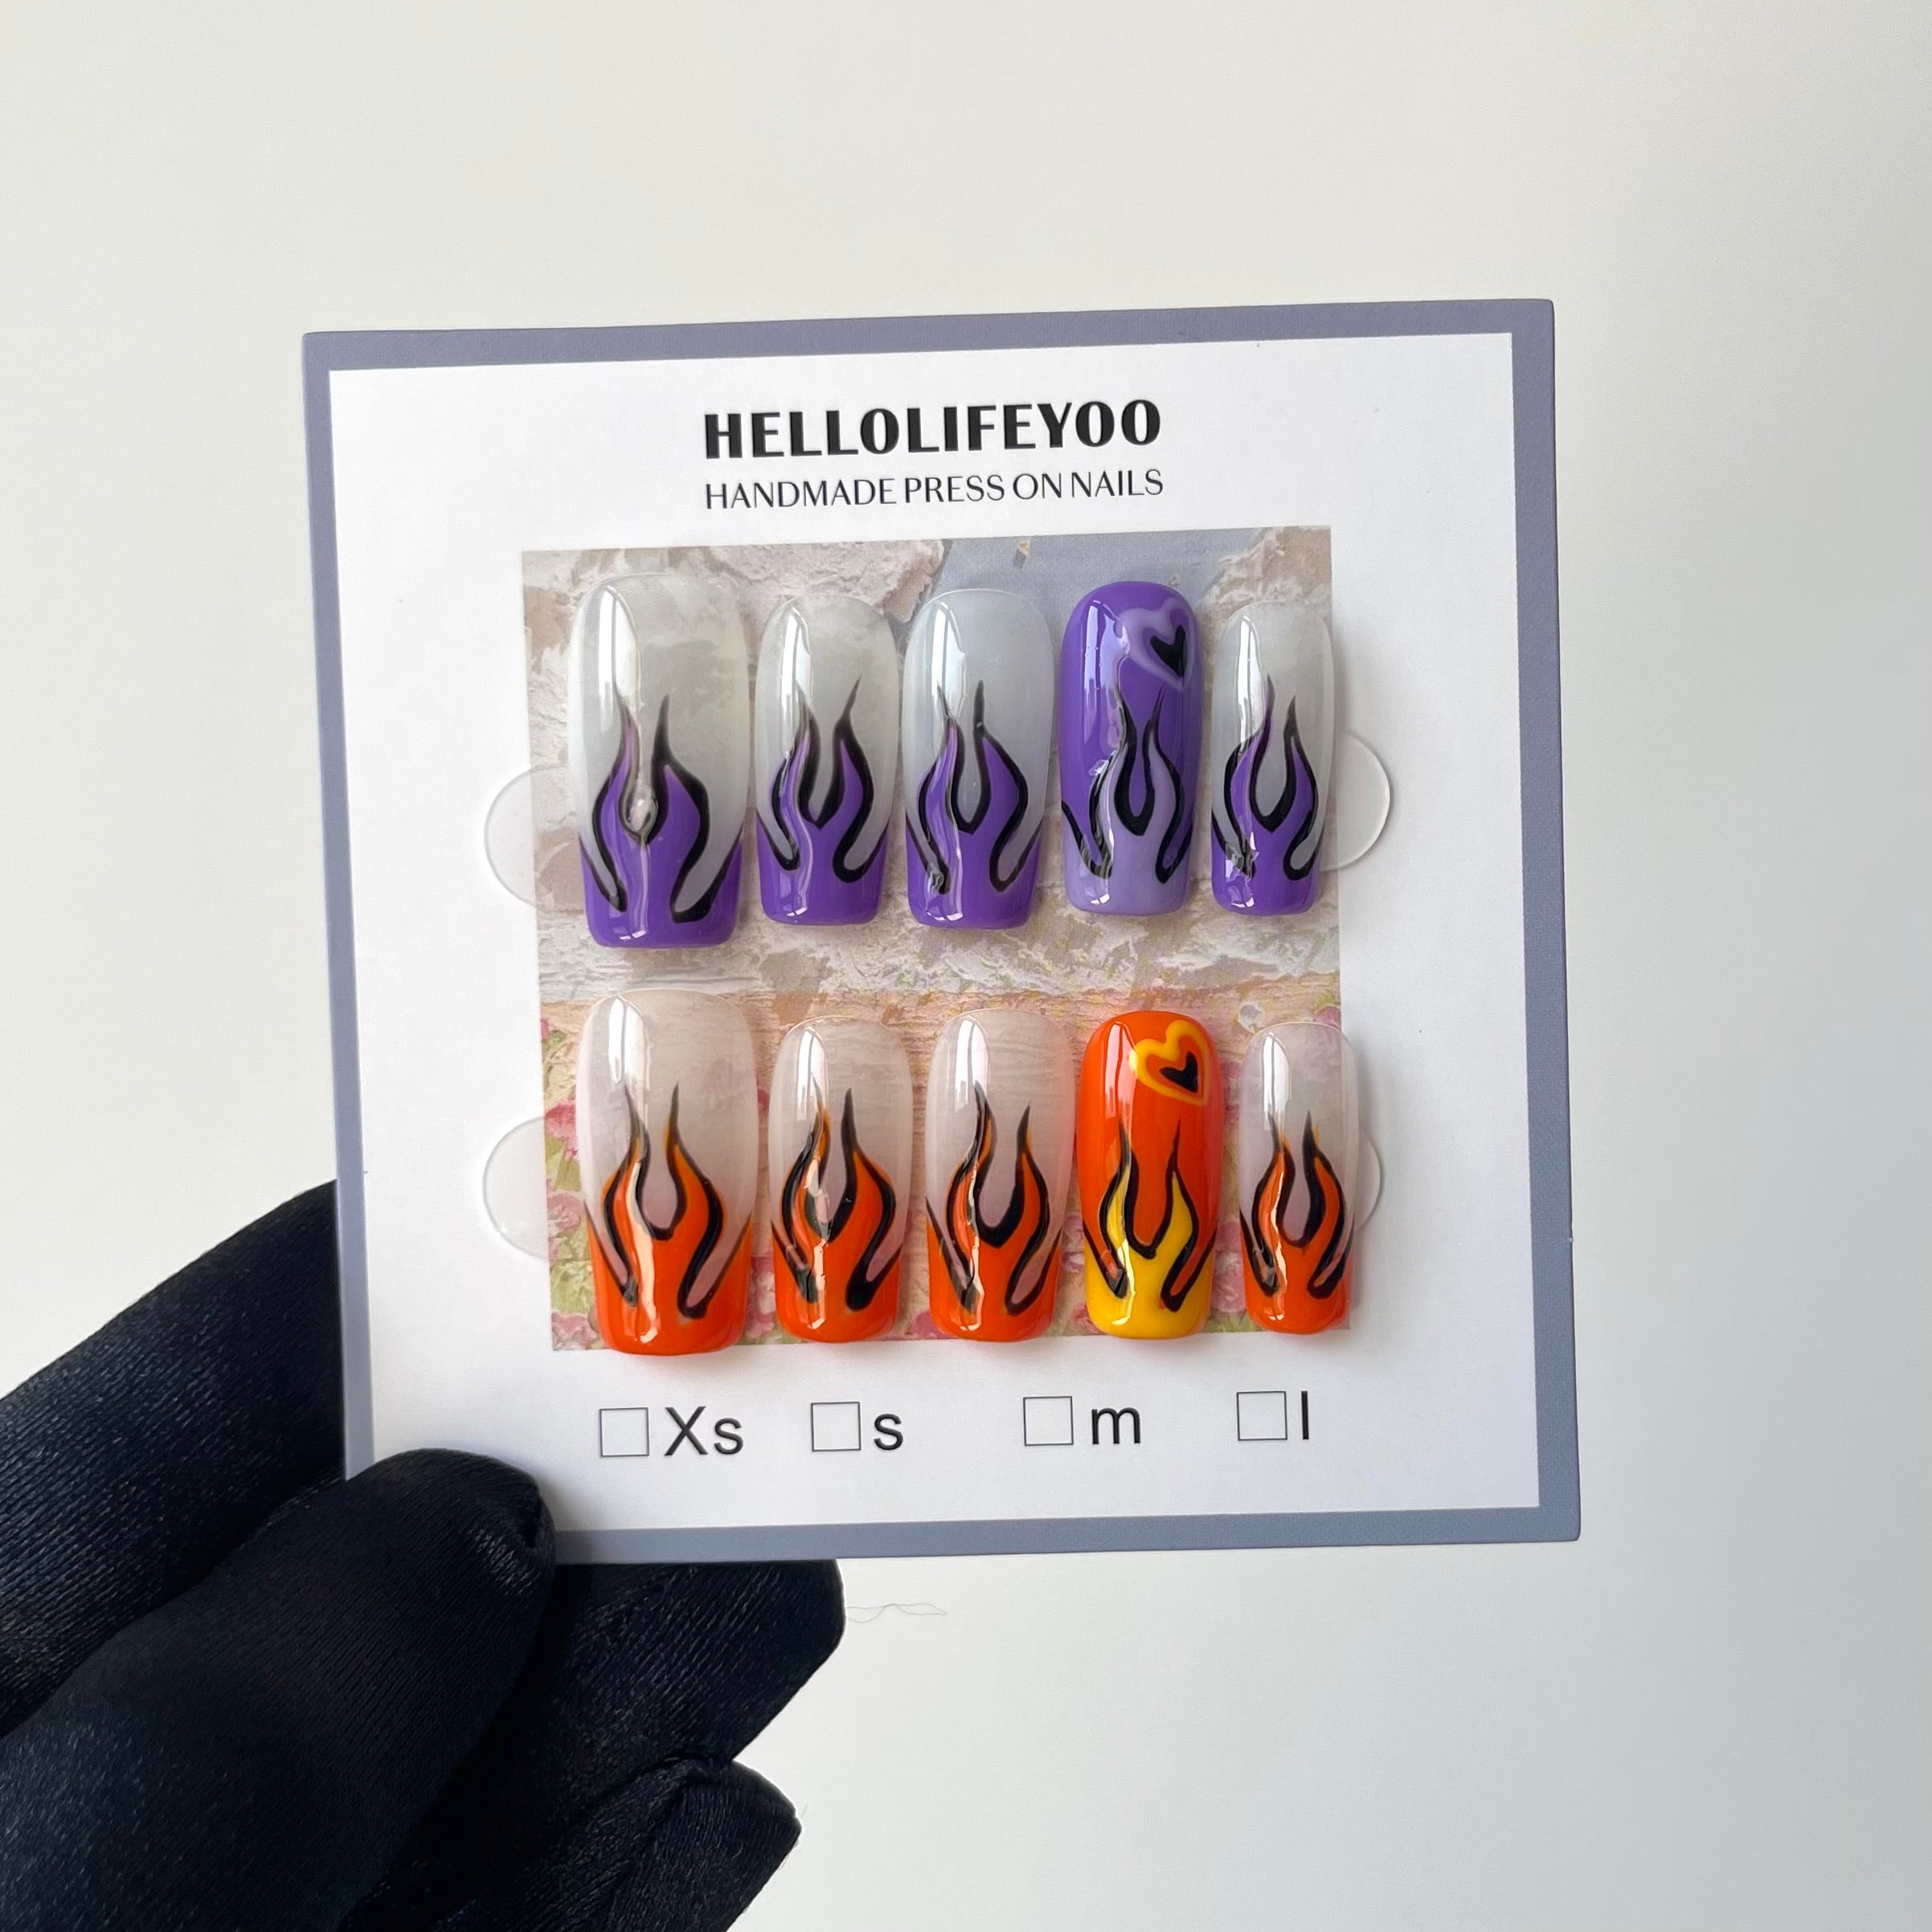 CONTRASTING FLAME -TEN PIECES OF HANDCRAFTED PRESS ON NAIL